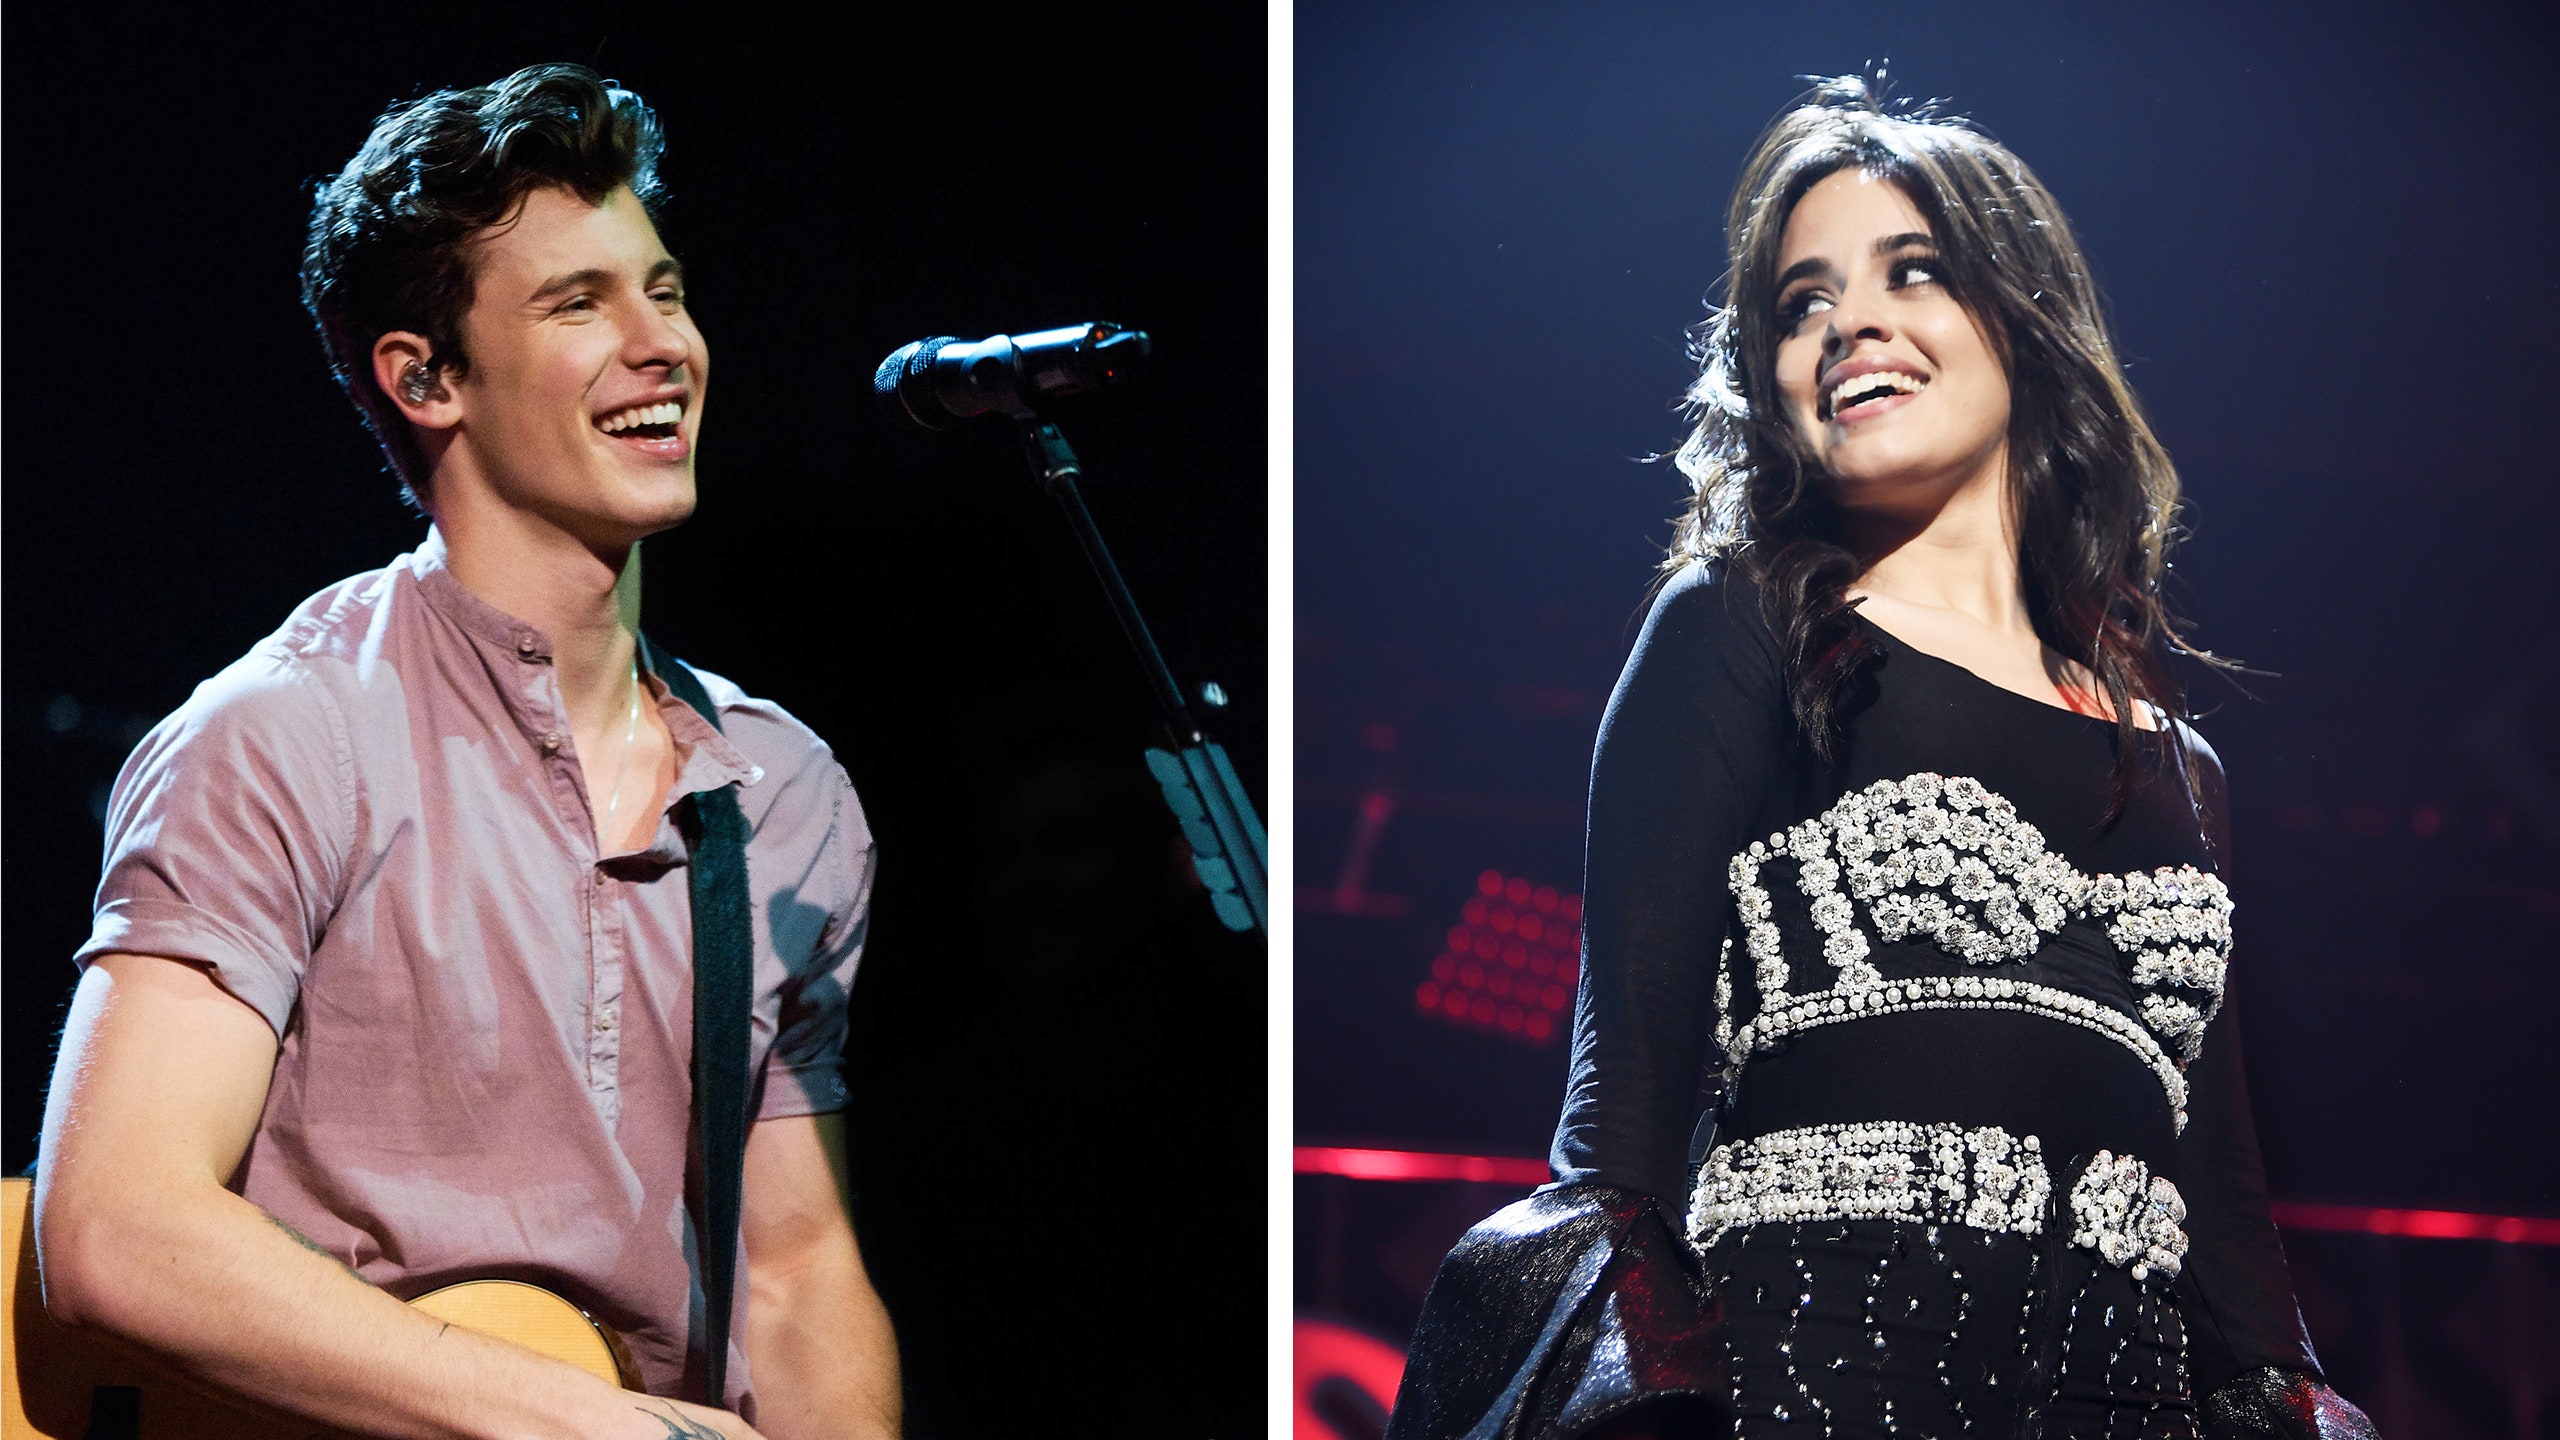 Shawn mendes and camila cabello dropped the first teasers of their new song and music video teen vogue